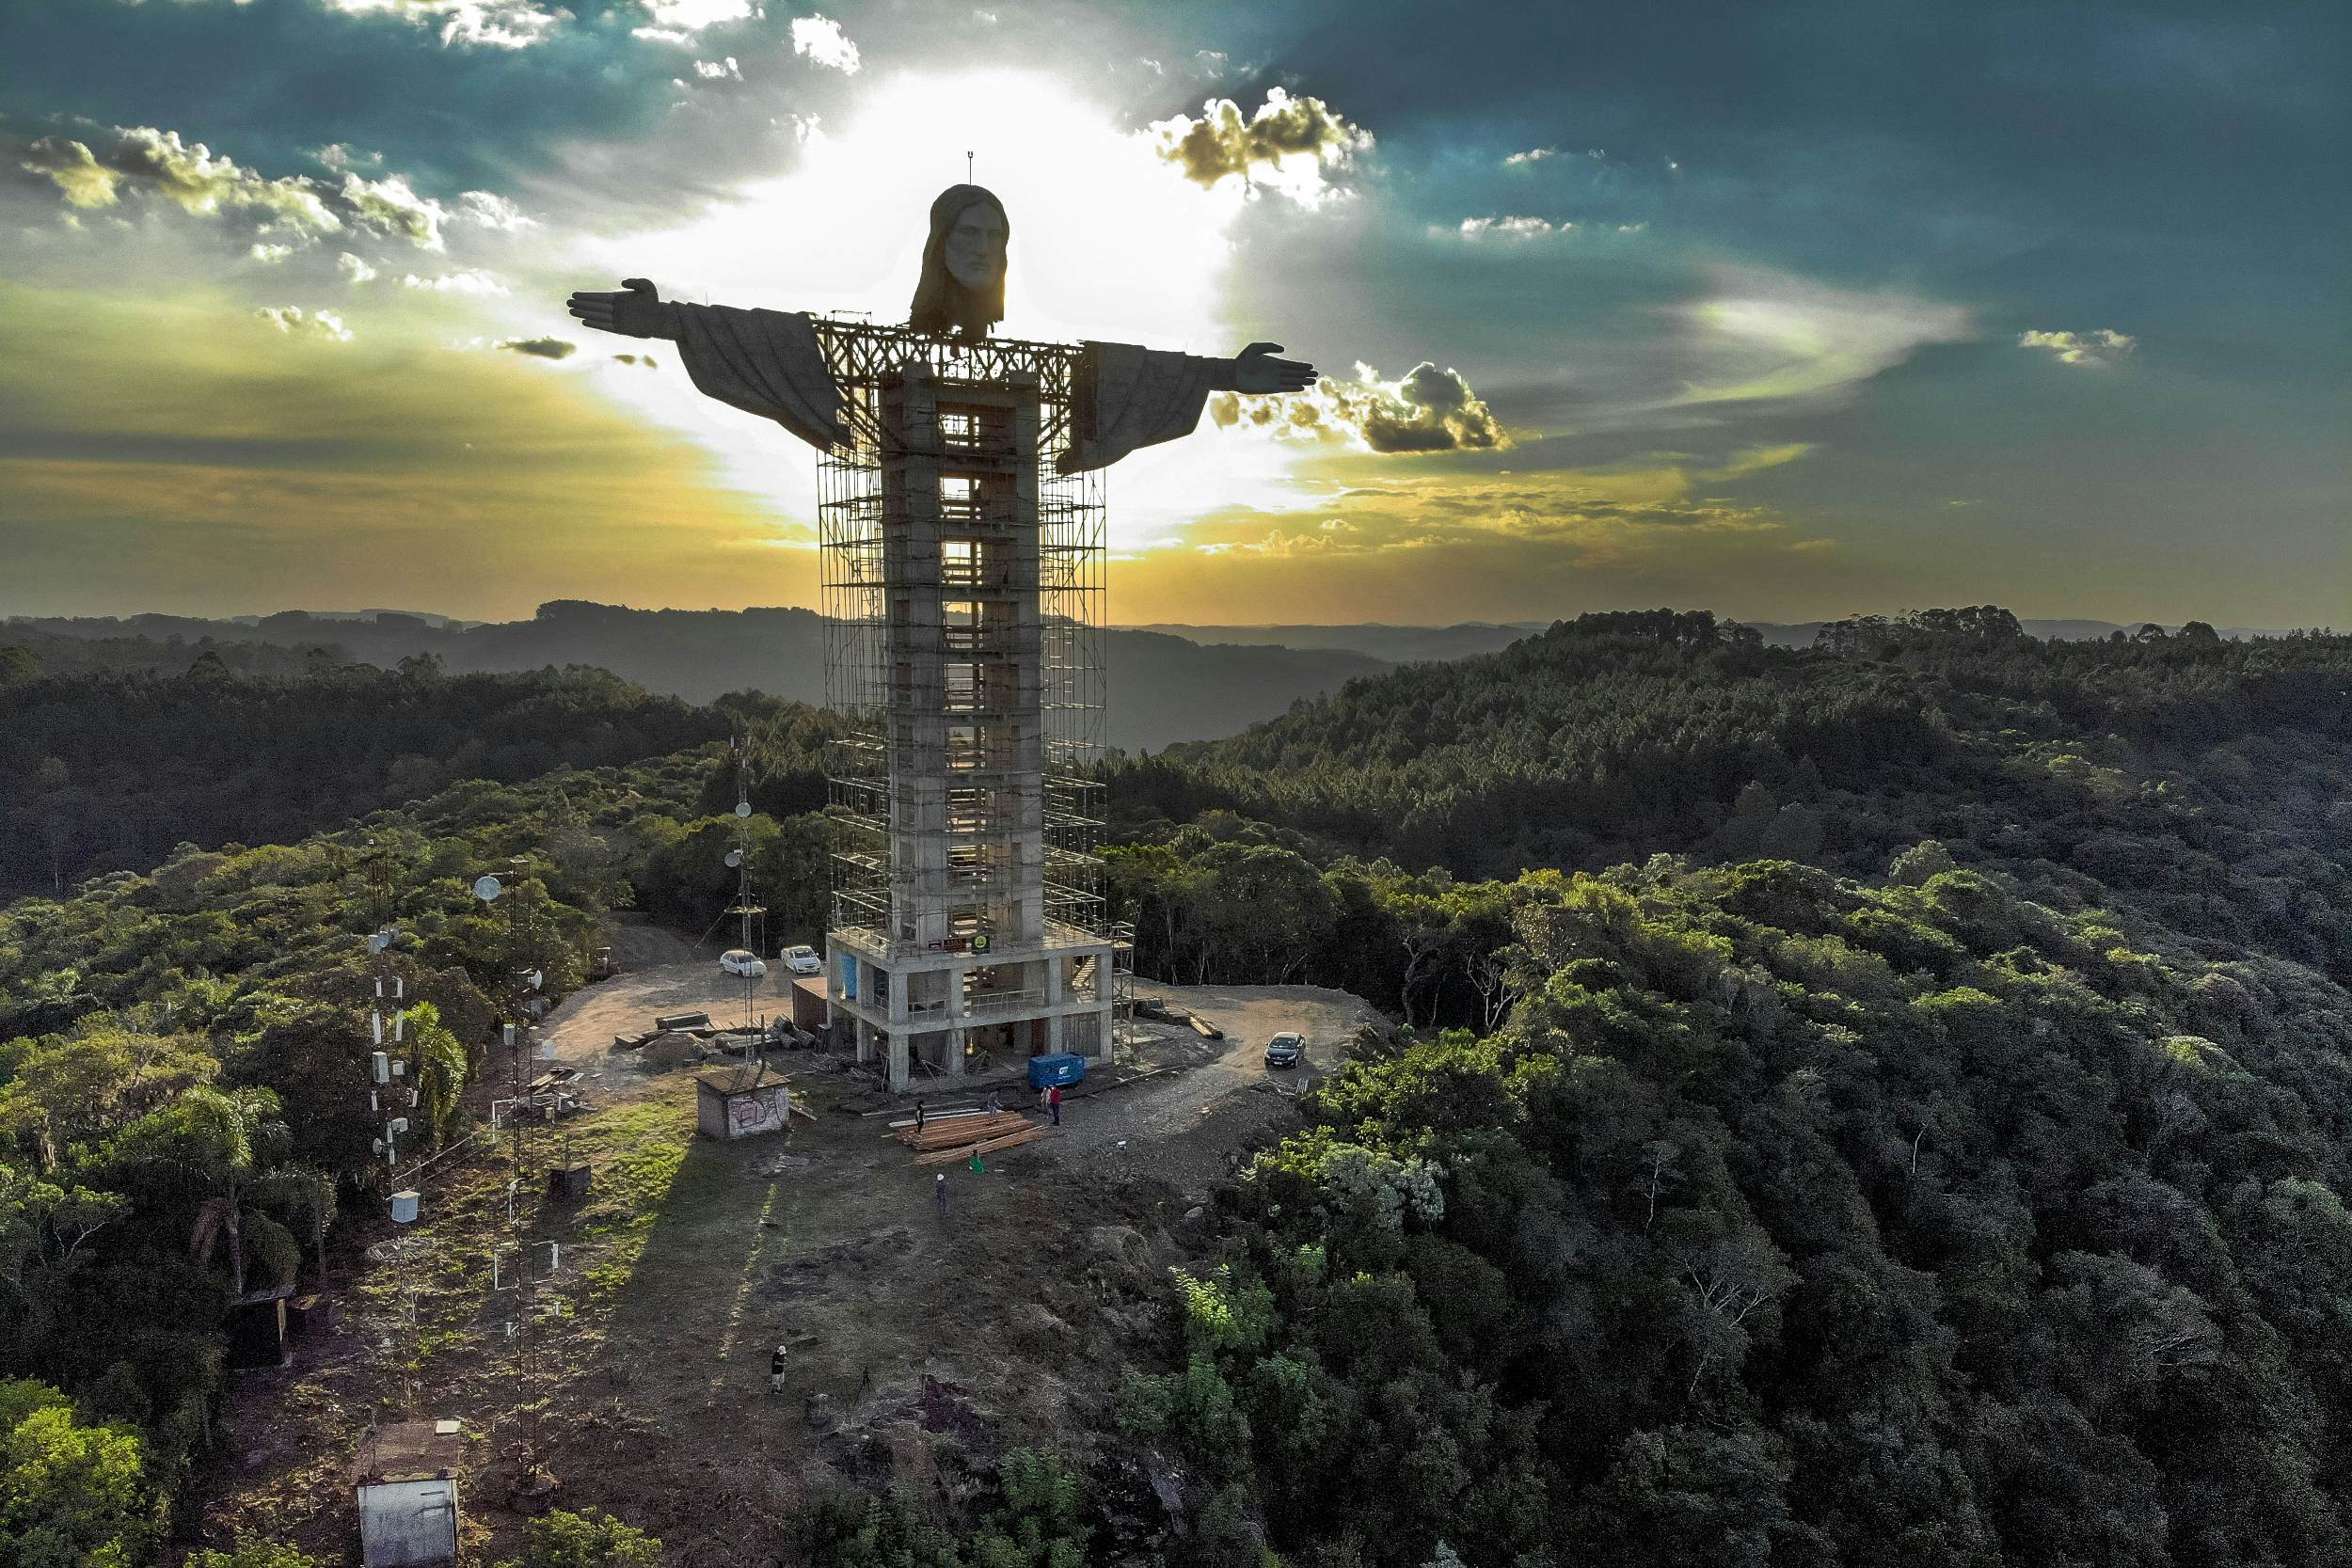 Brazil S New Statue Will Be Taller Than Rio S Christ The Redeemer